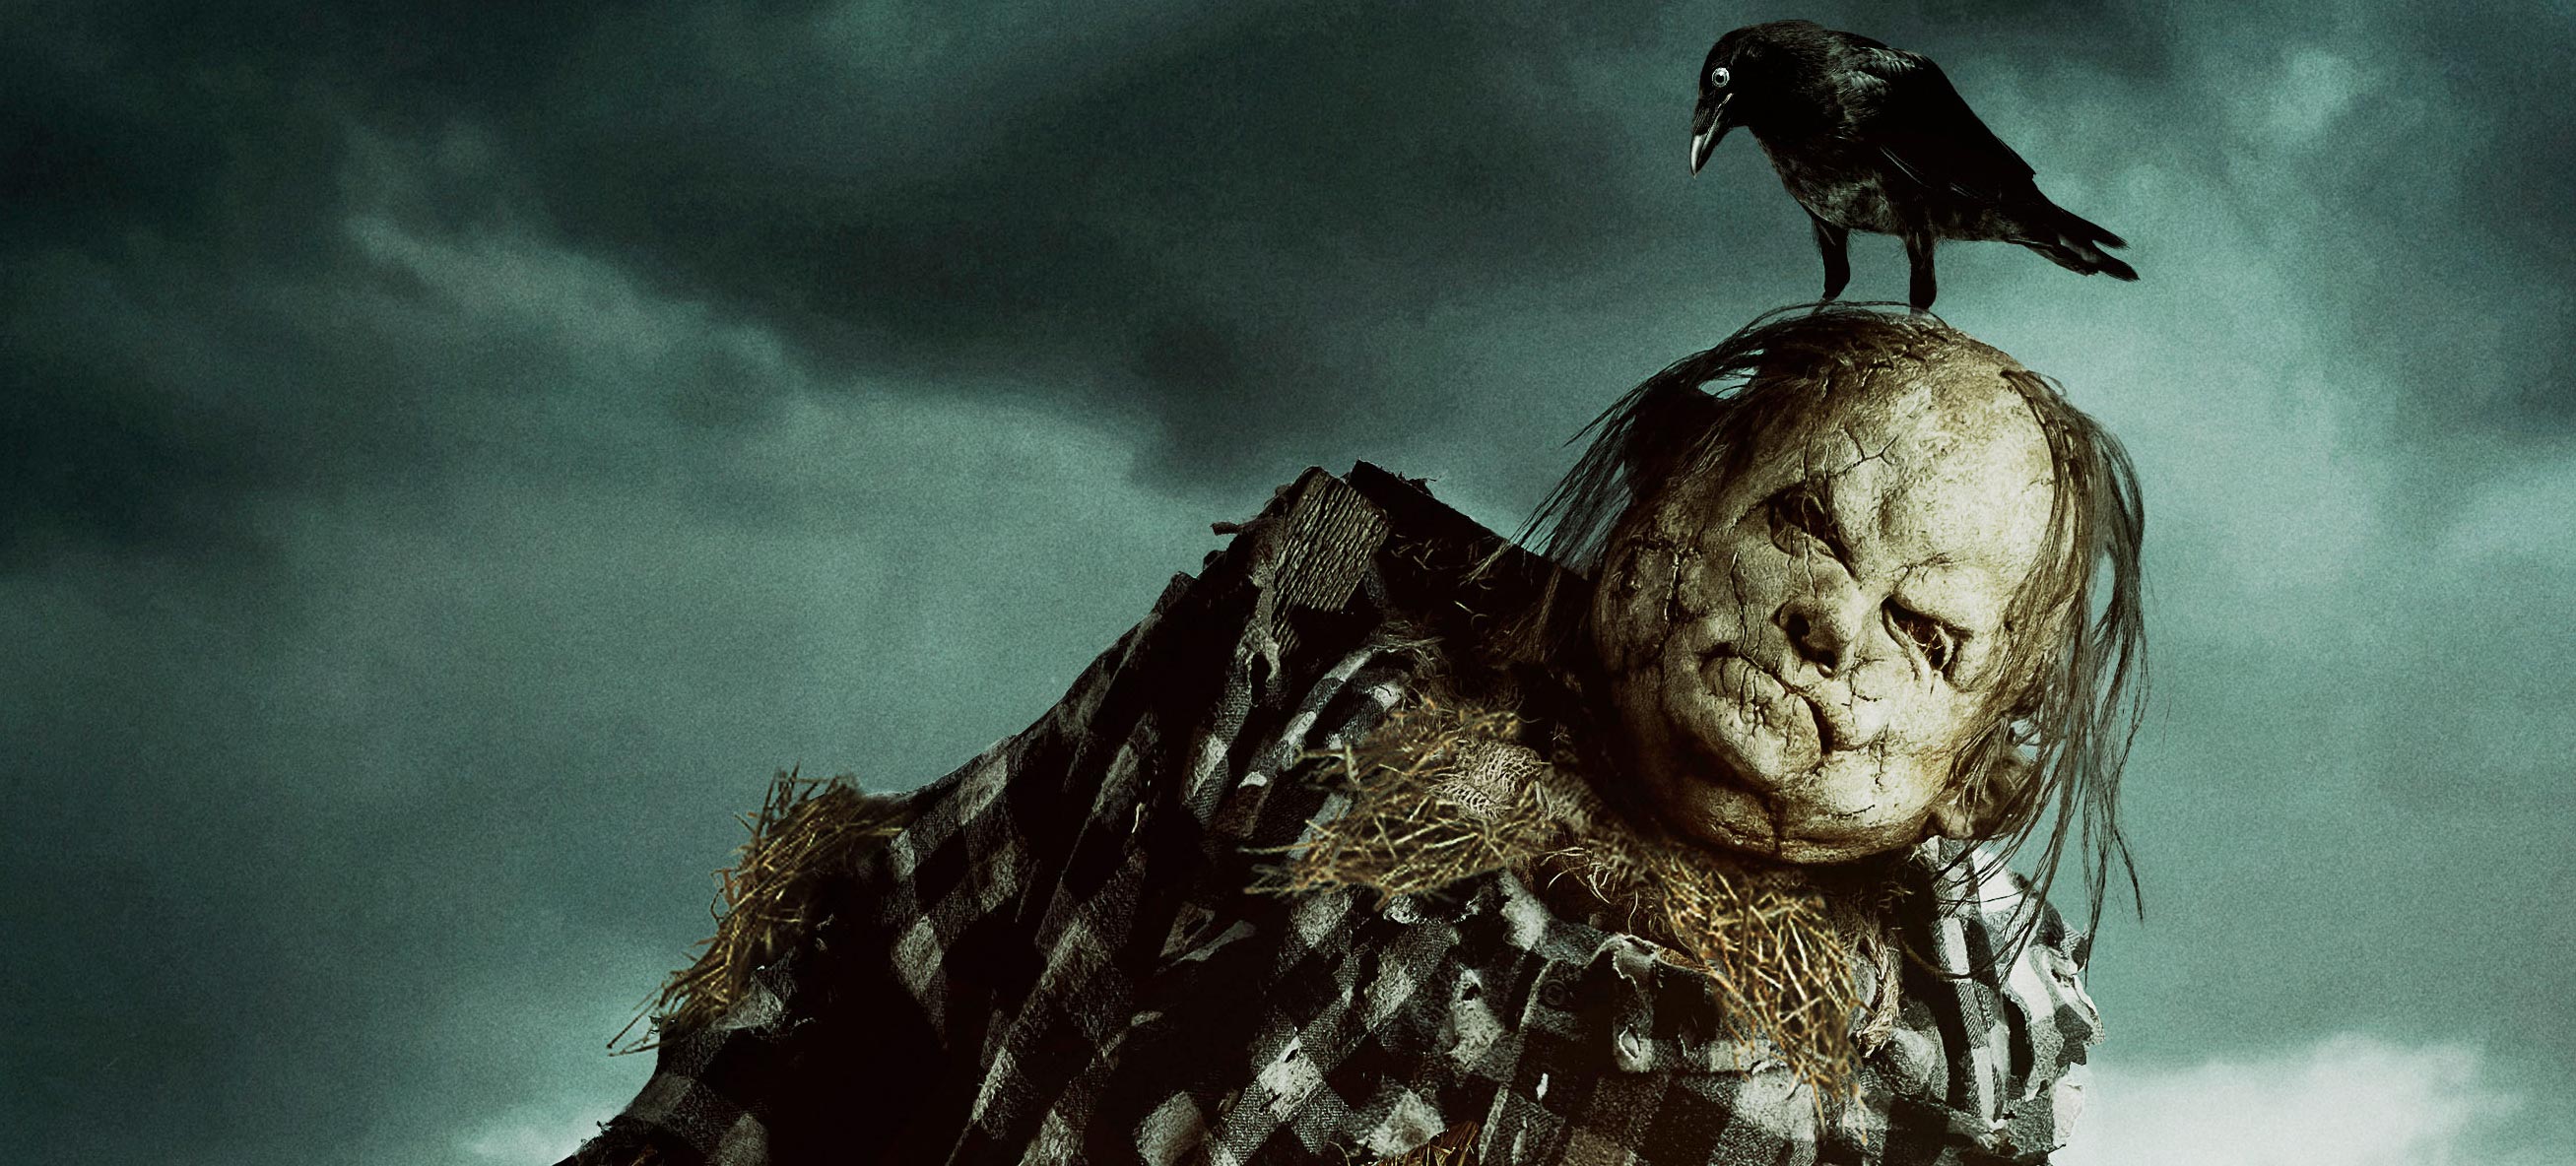 Scary Stories To Tell In The Dark Trailer The Children S Horror